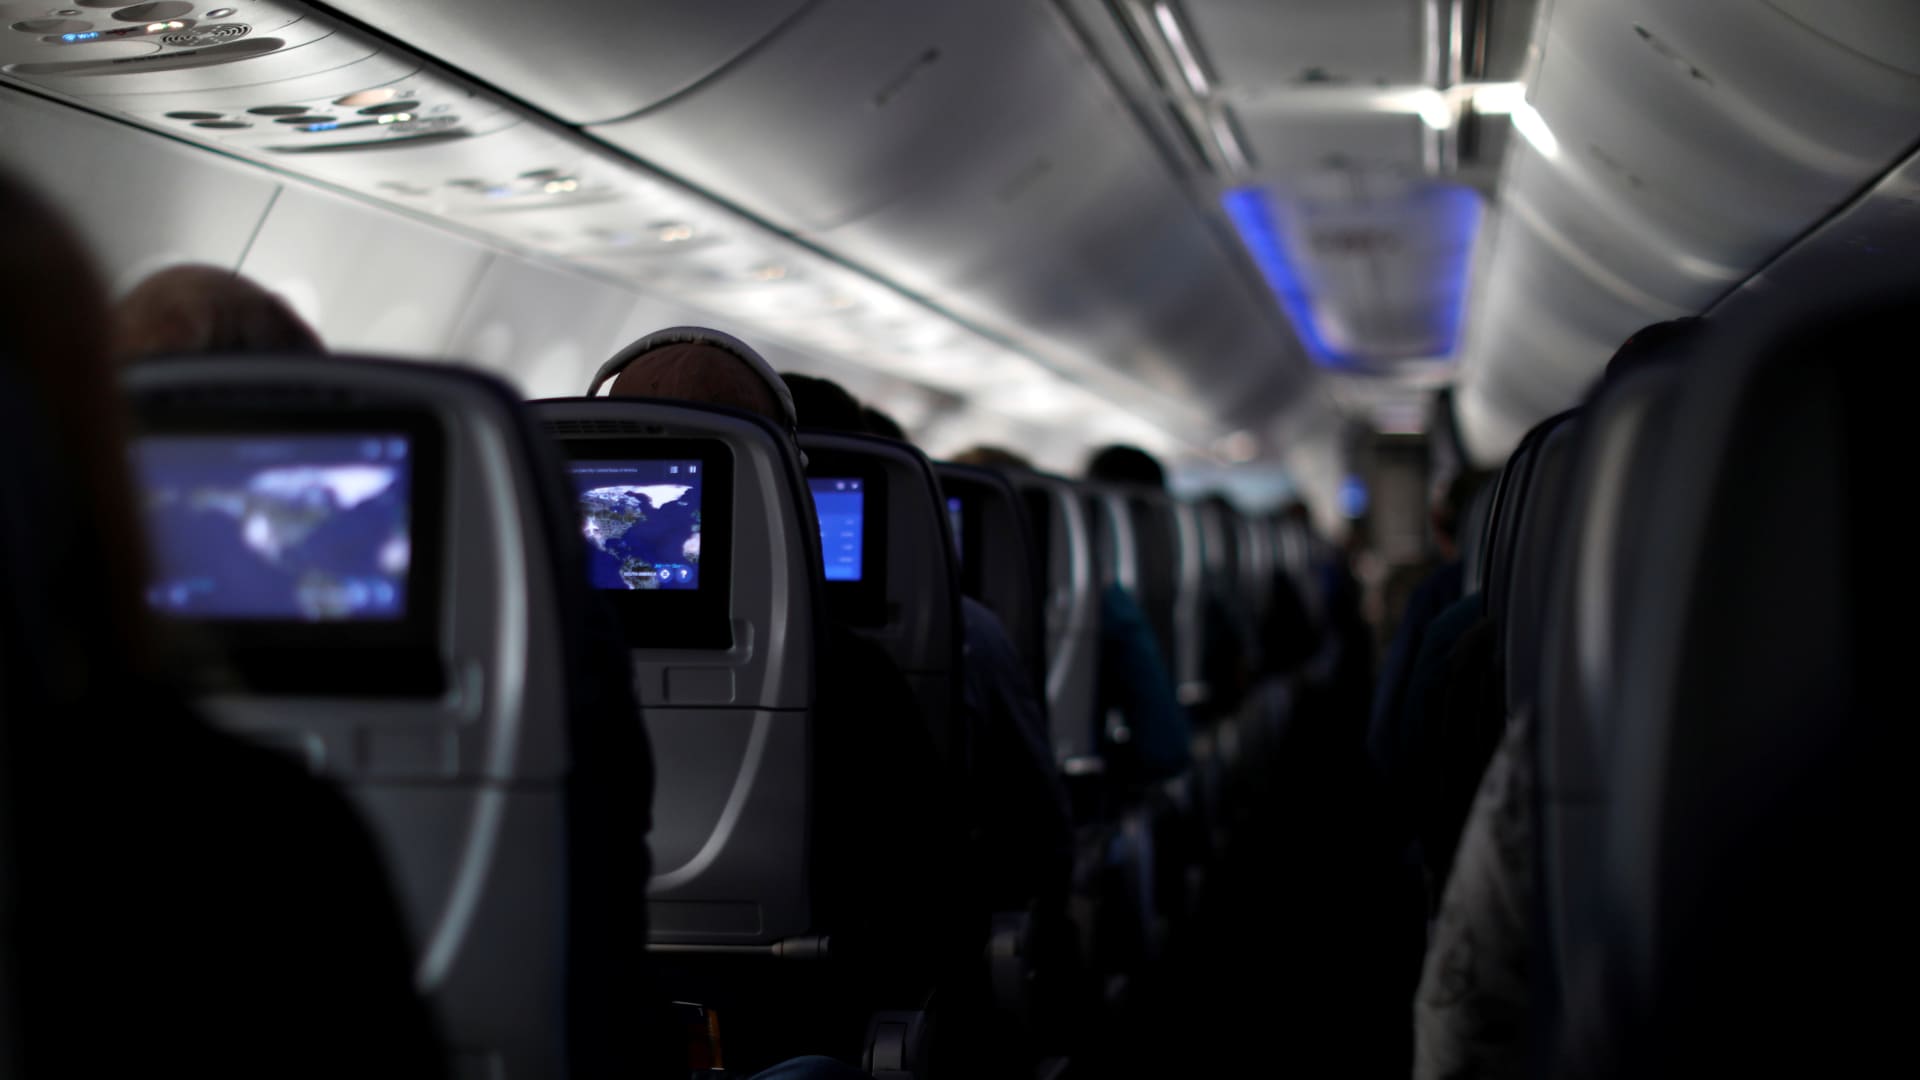 Delta plans to offer free Wi-Fi starting February 1